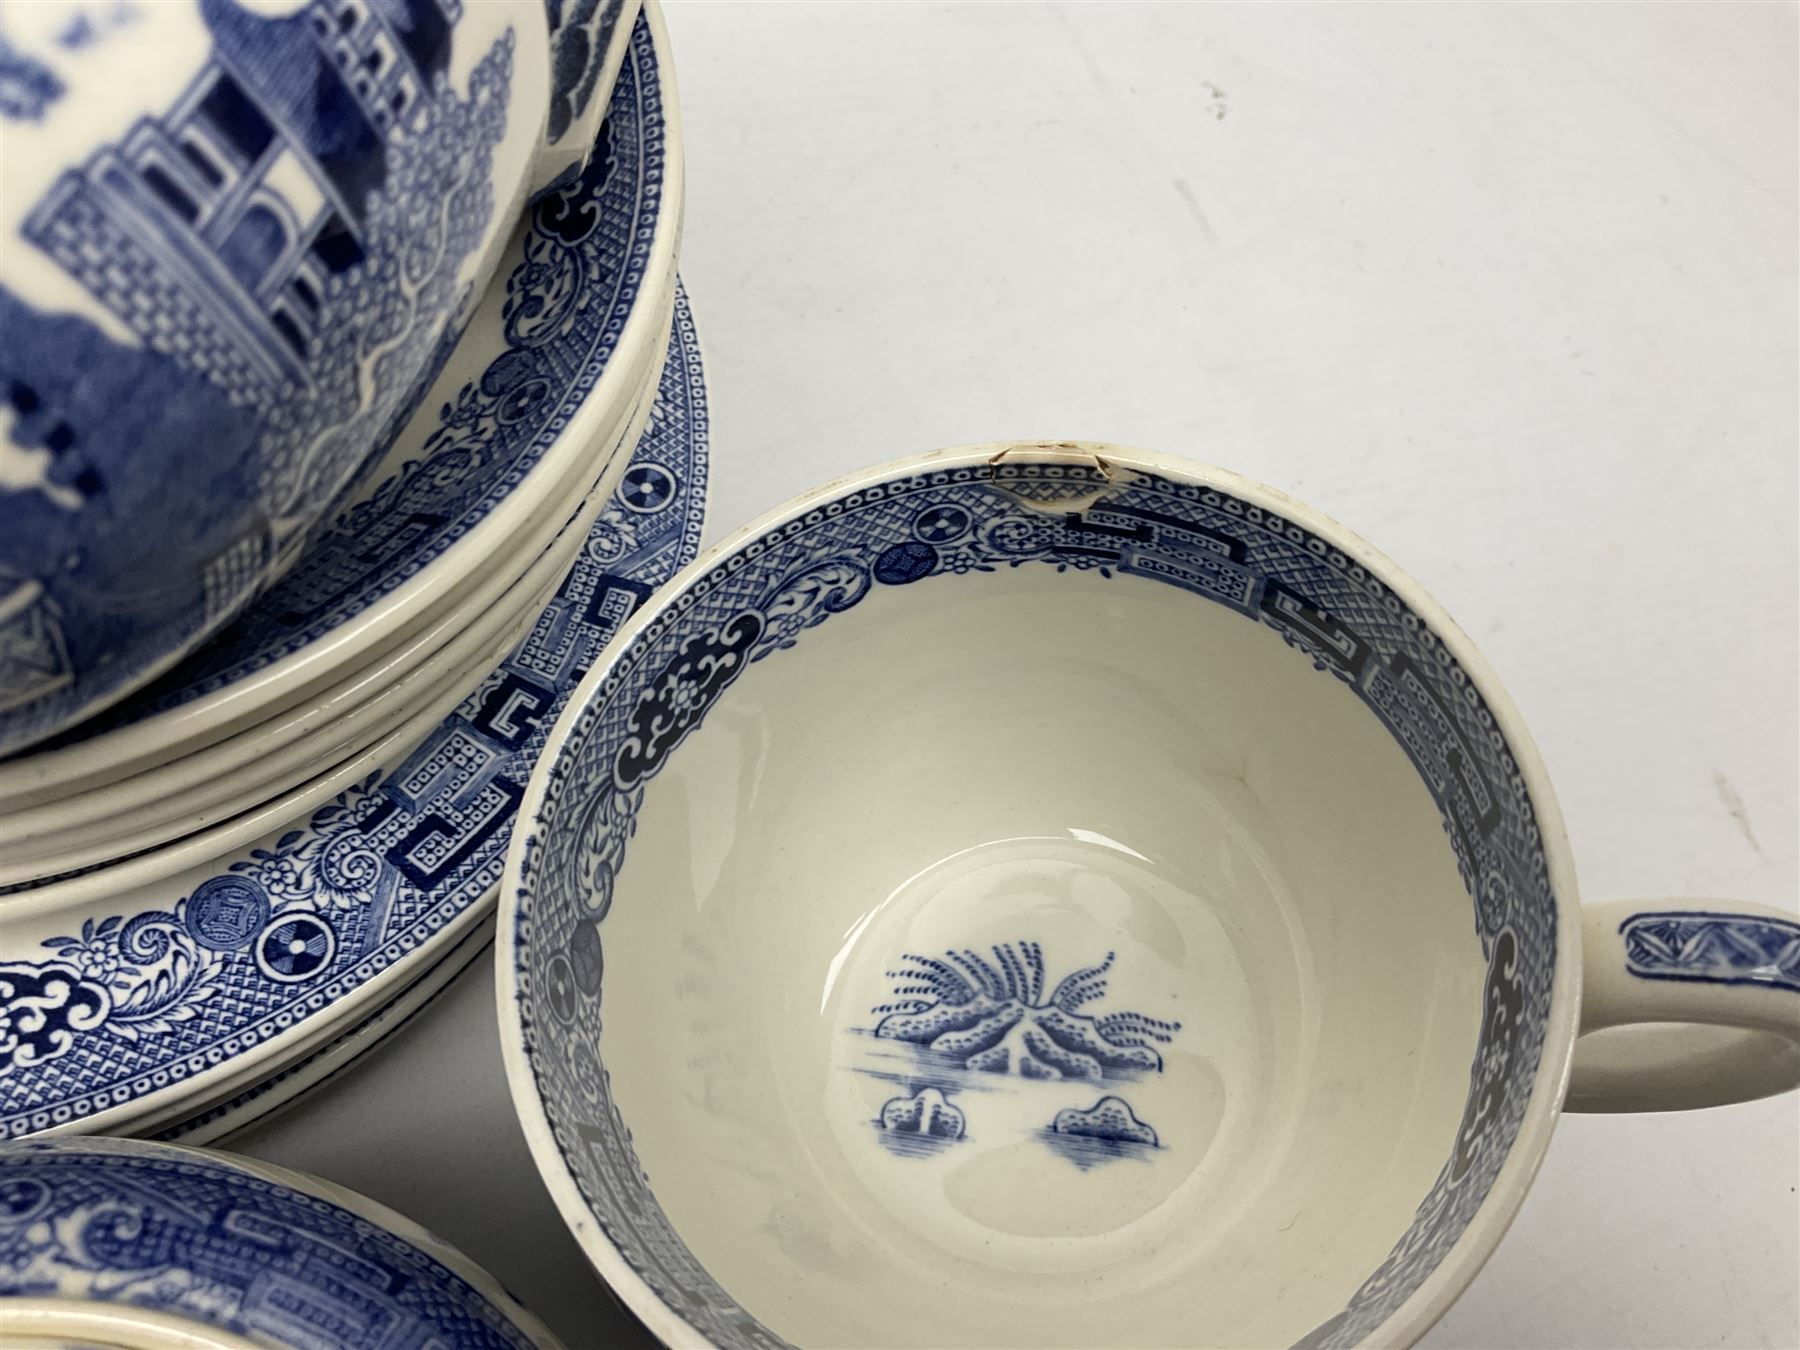 Wedgwood of Etruria blue and white willow patterned tea and dinner wares - Image 5 of 6